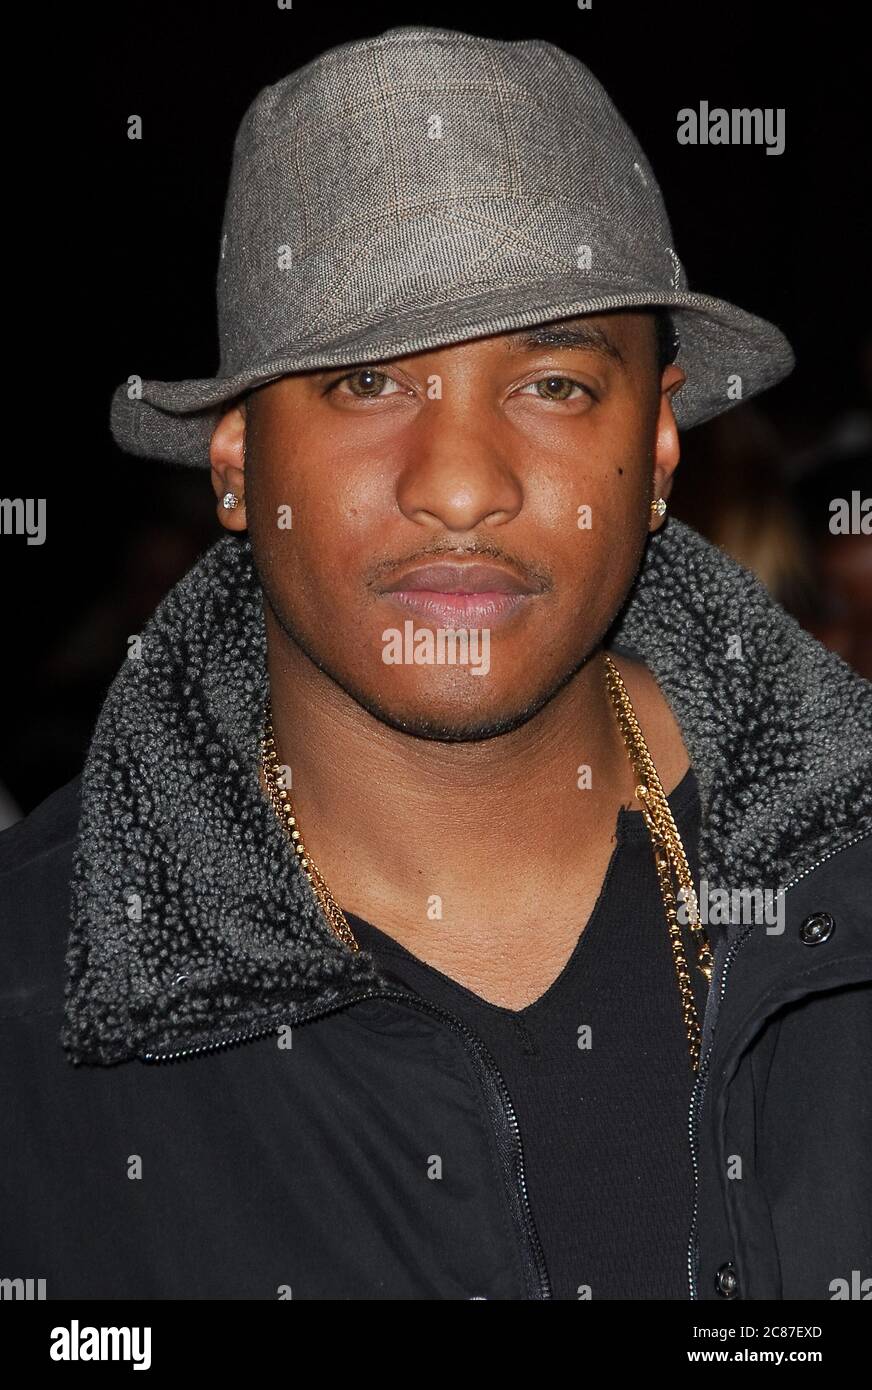 Sterlen Roberts at the Premiere of 'Somebody Help Me' held at the Grauman's Chinese Theater in Hollywood, CA. The event took place on Thursday, October25, 2007. Photo by: SBM / PictureLux- File Reference # 34006-9659SBMPLX Stock Photo